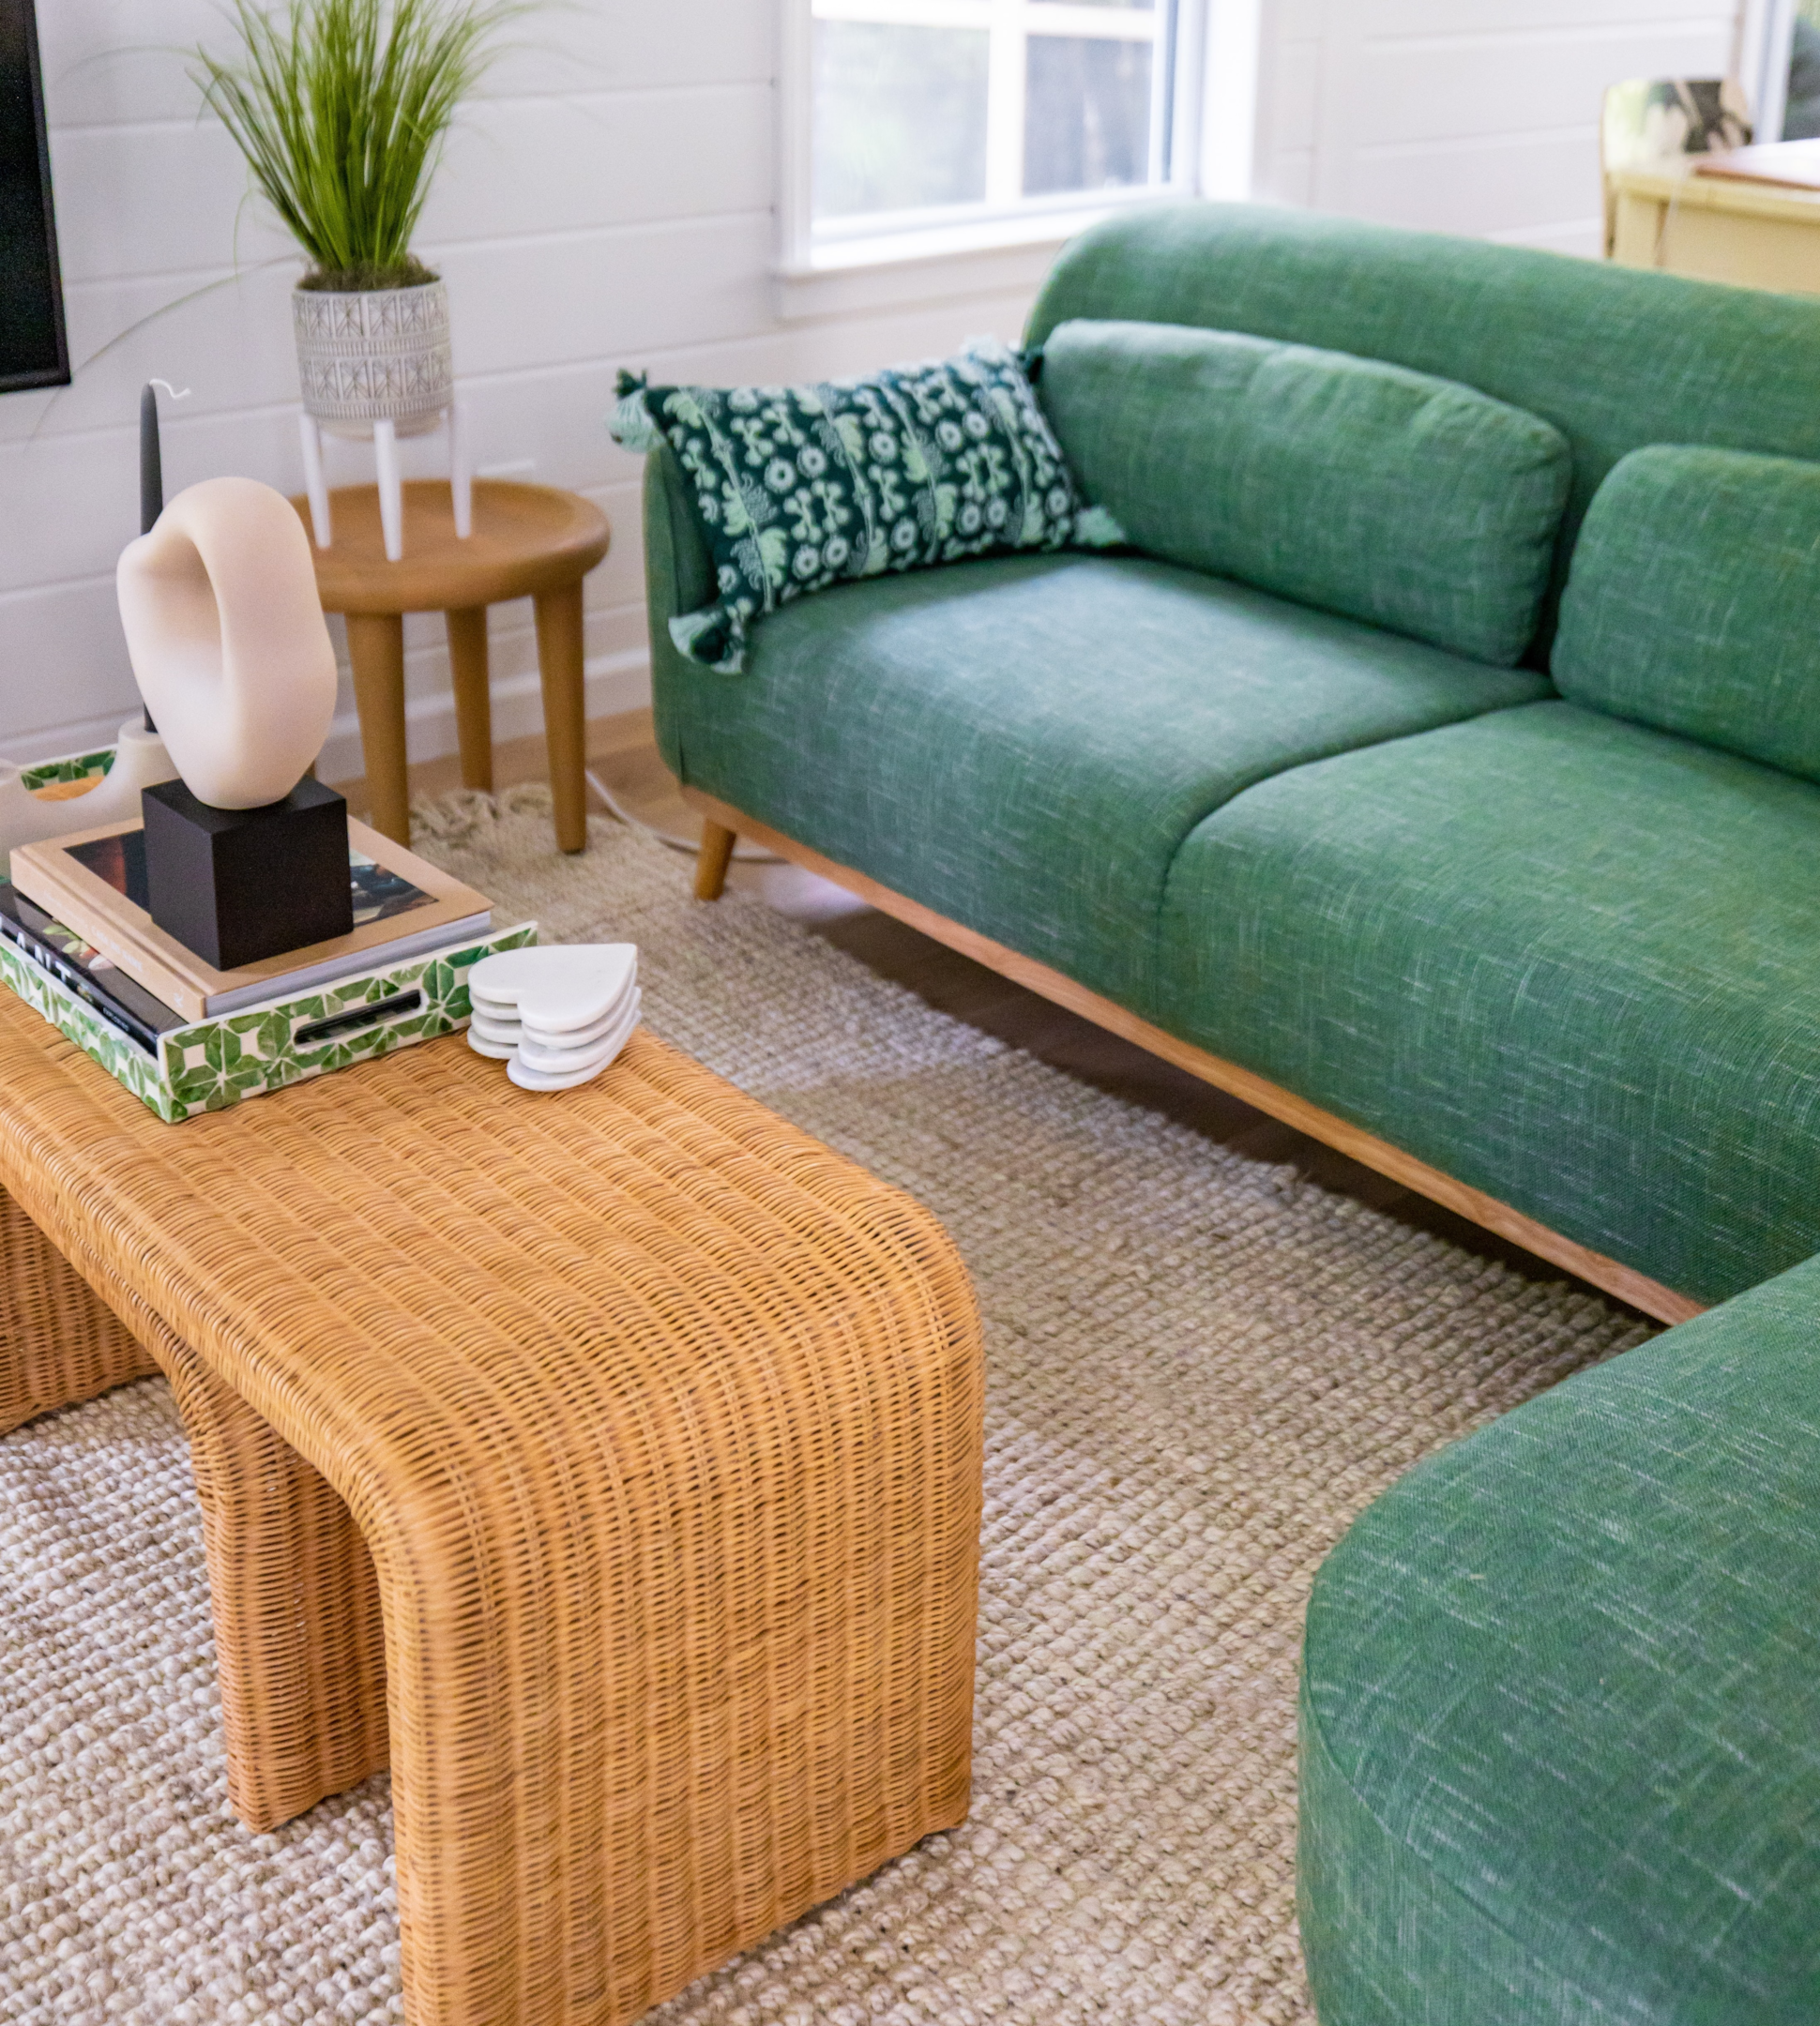 Image credit: https://www.pexels.com/photo/a-cozy-living-room-with-green-couch-12474787/